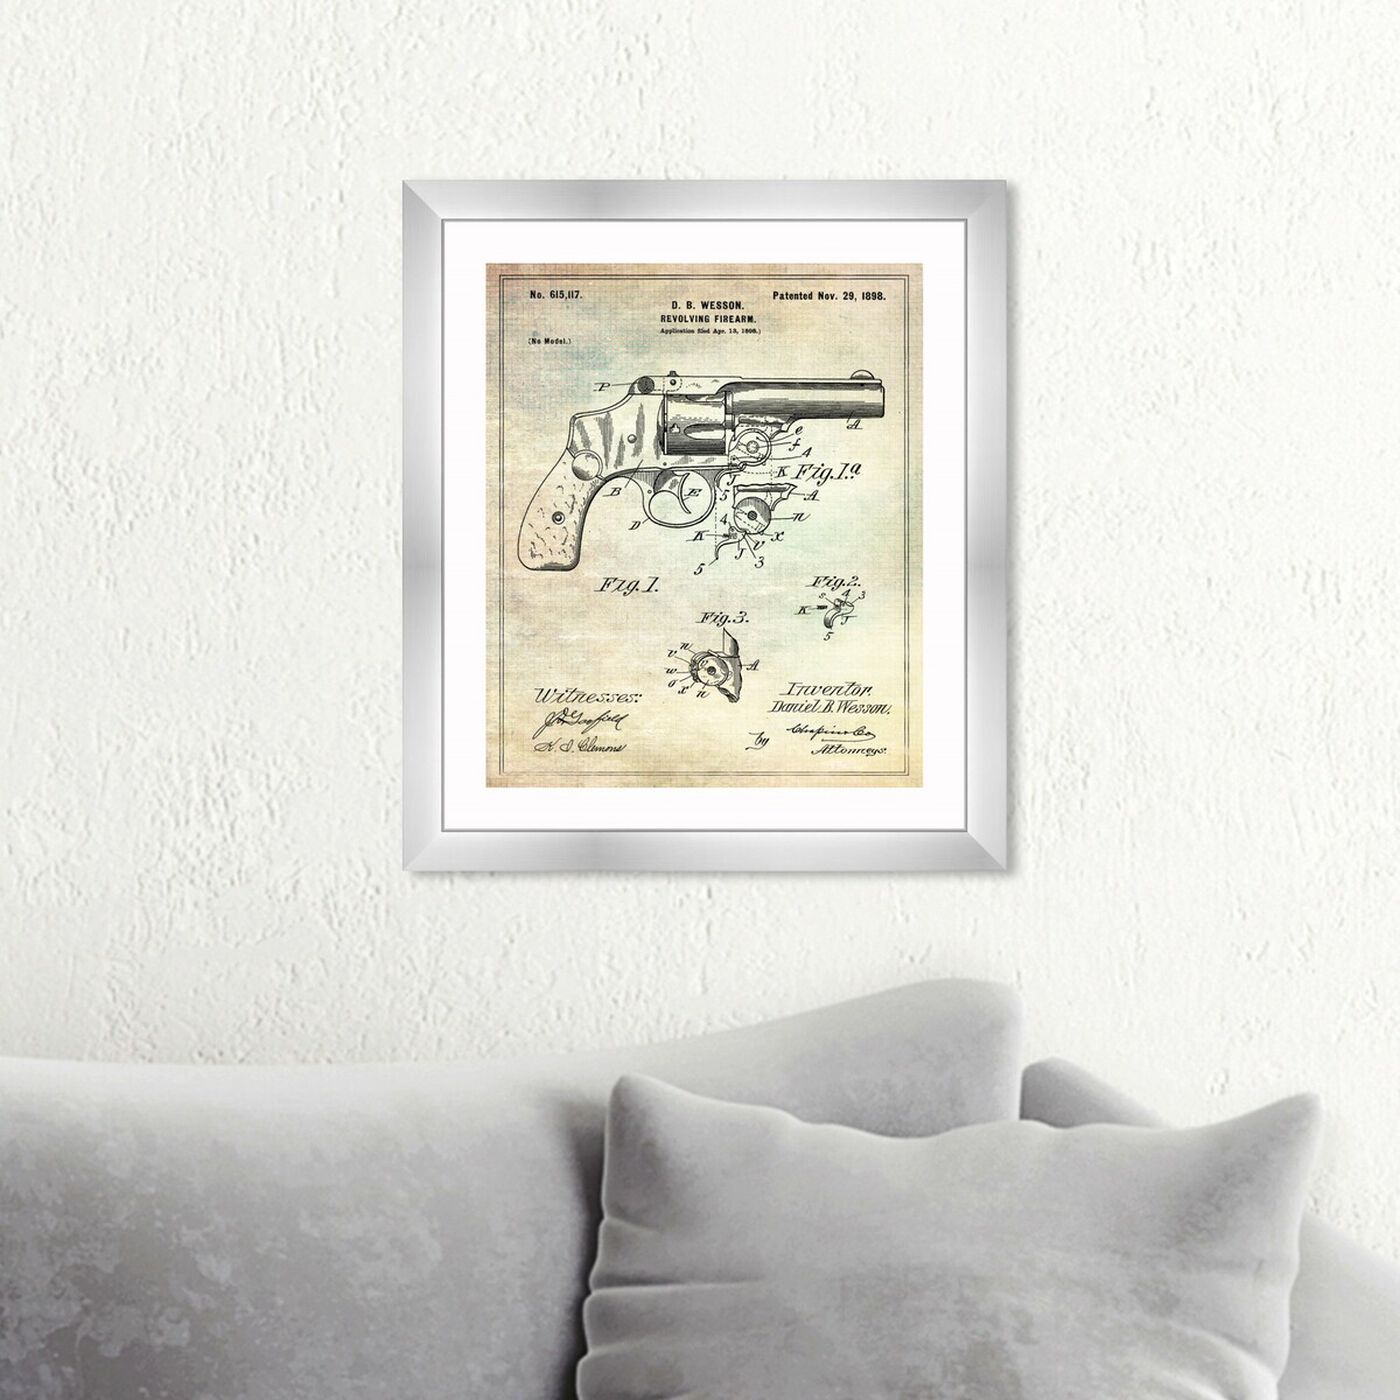 Hanging view of Wesson Pistol 1898 featuring entertainment and hobbies and machine guns art.